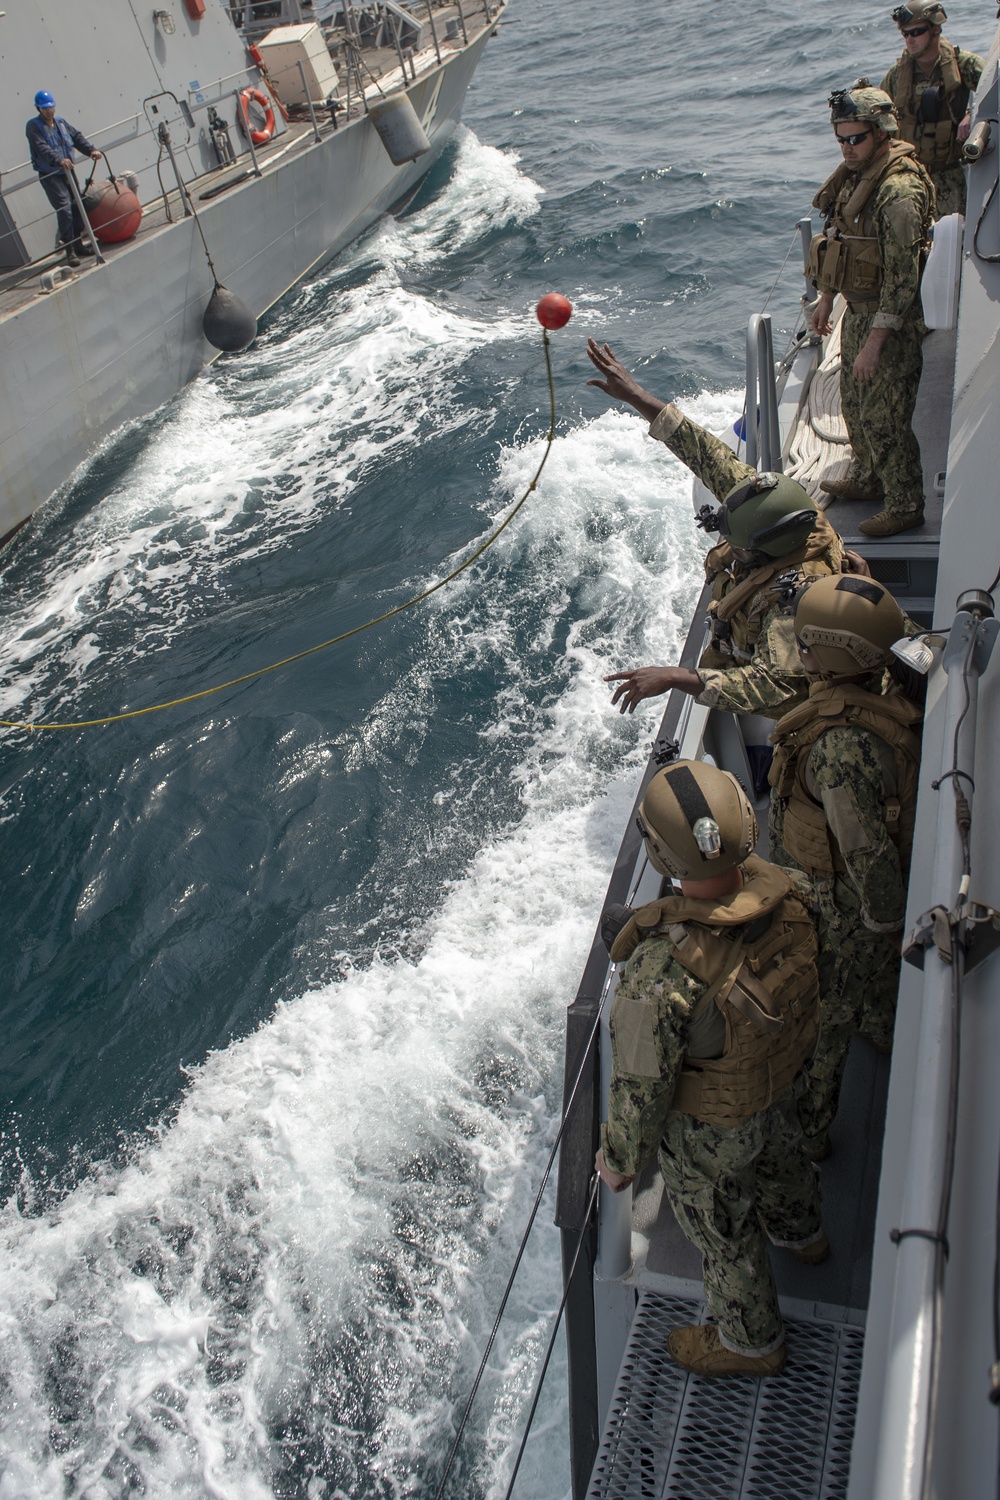 DVIDS - Images - CTF 56 Mark VI boats complete a joint underway with ...